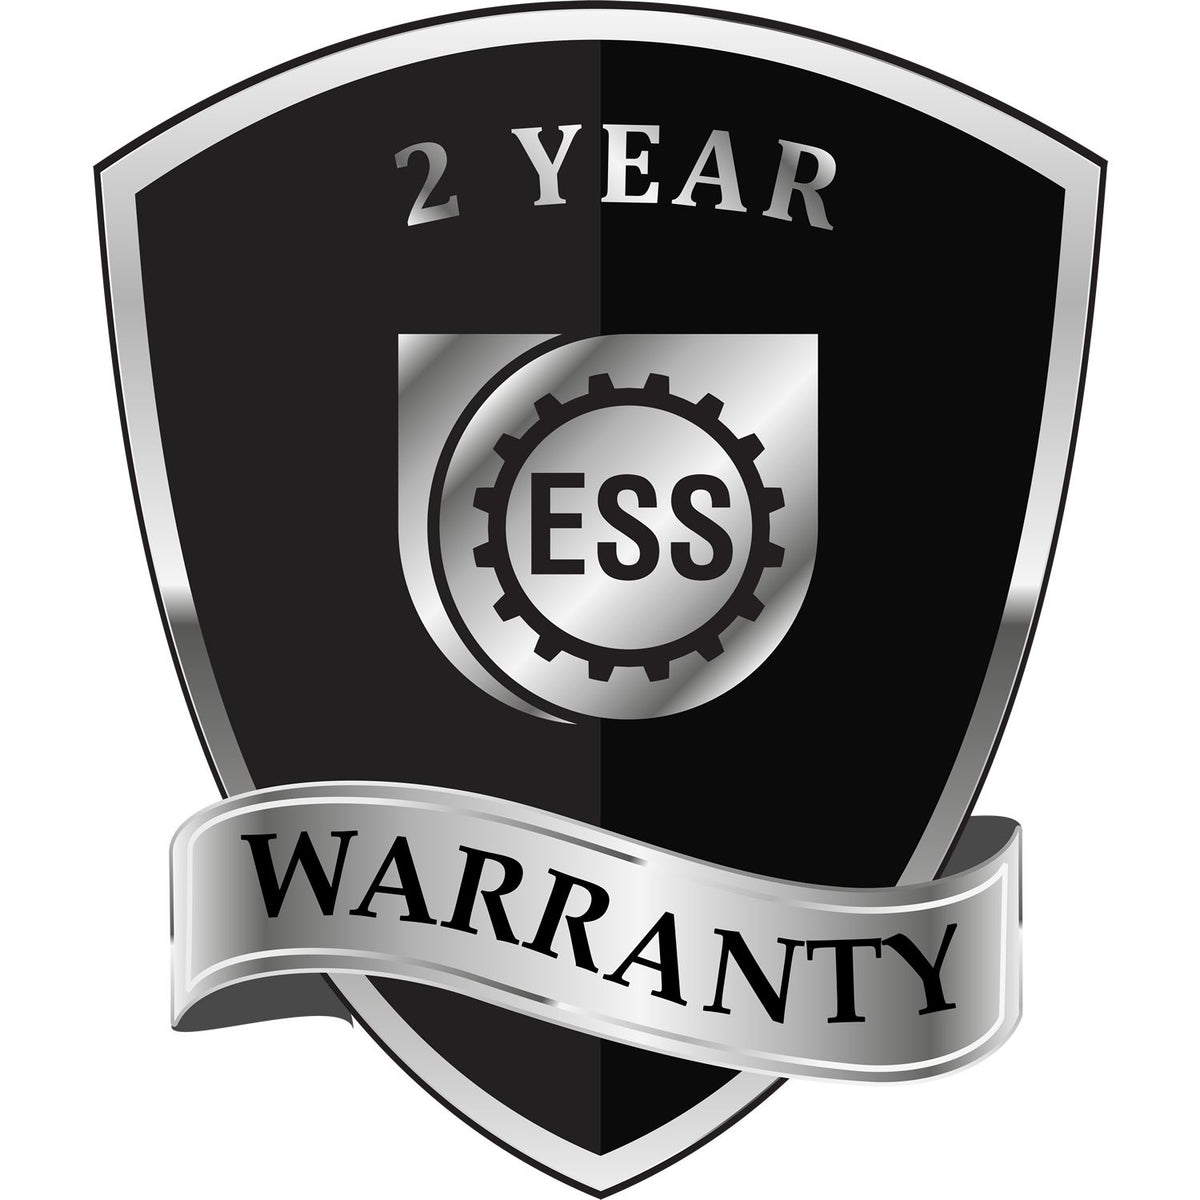 A badge or emblem showing a warranty icon for the Soft Nevada Professional Engineer Seal